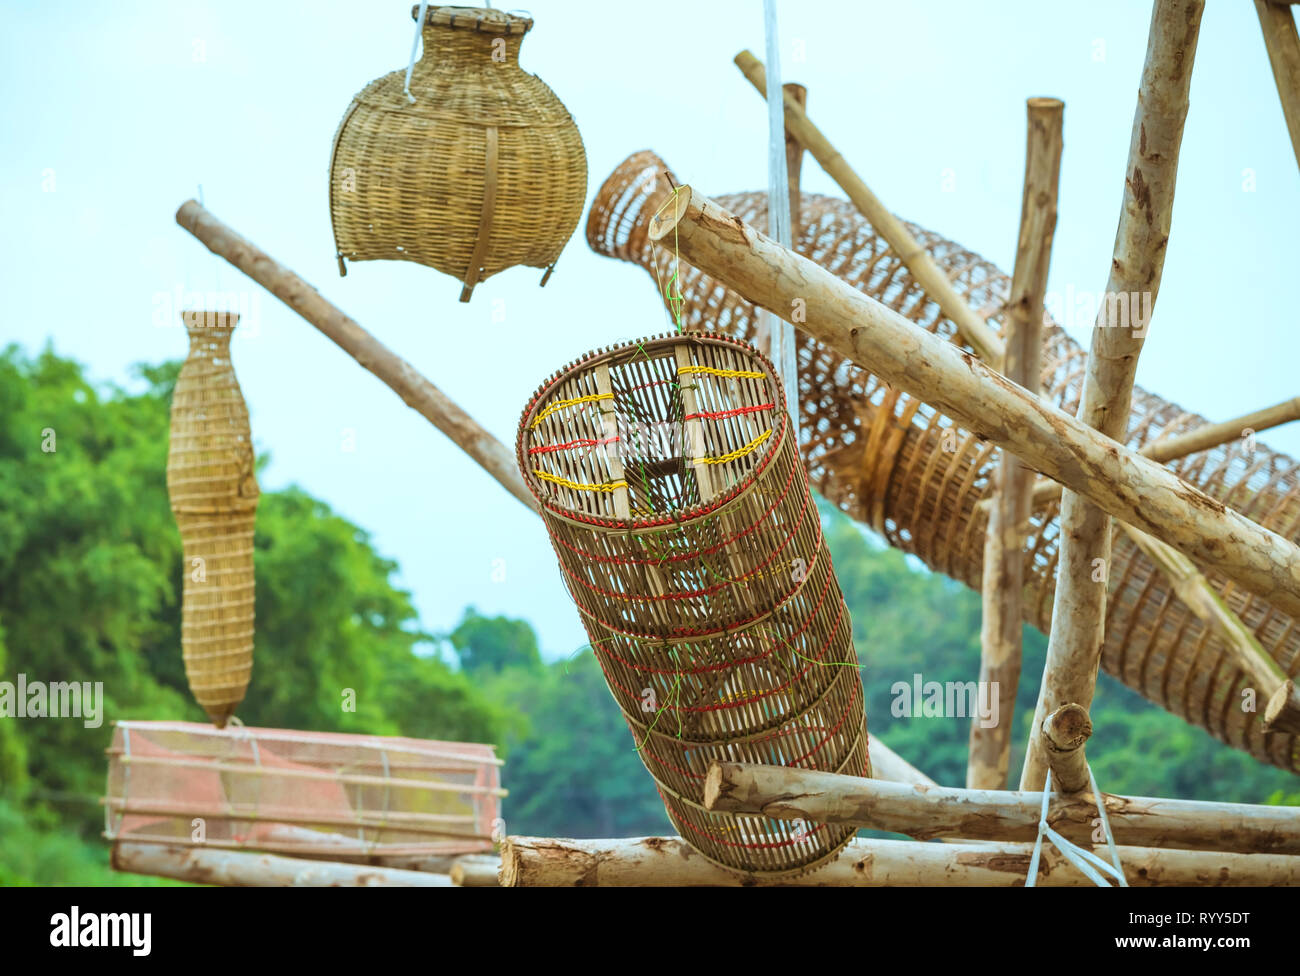 Ancient bamboo fish trap equipment of countryside, Thailand Stock Photo -  Alamy